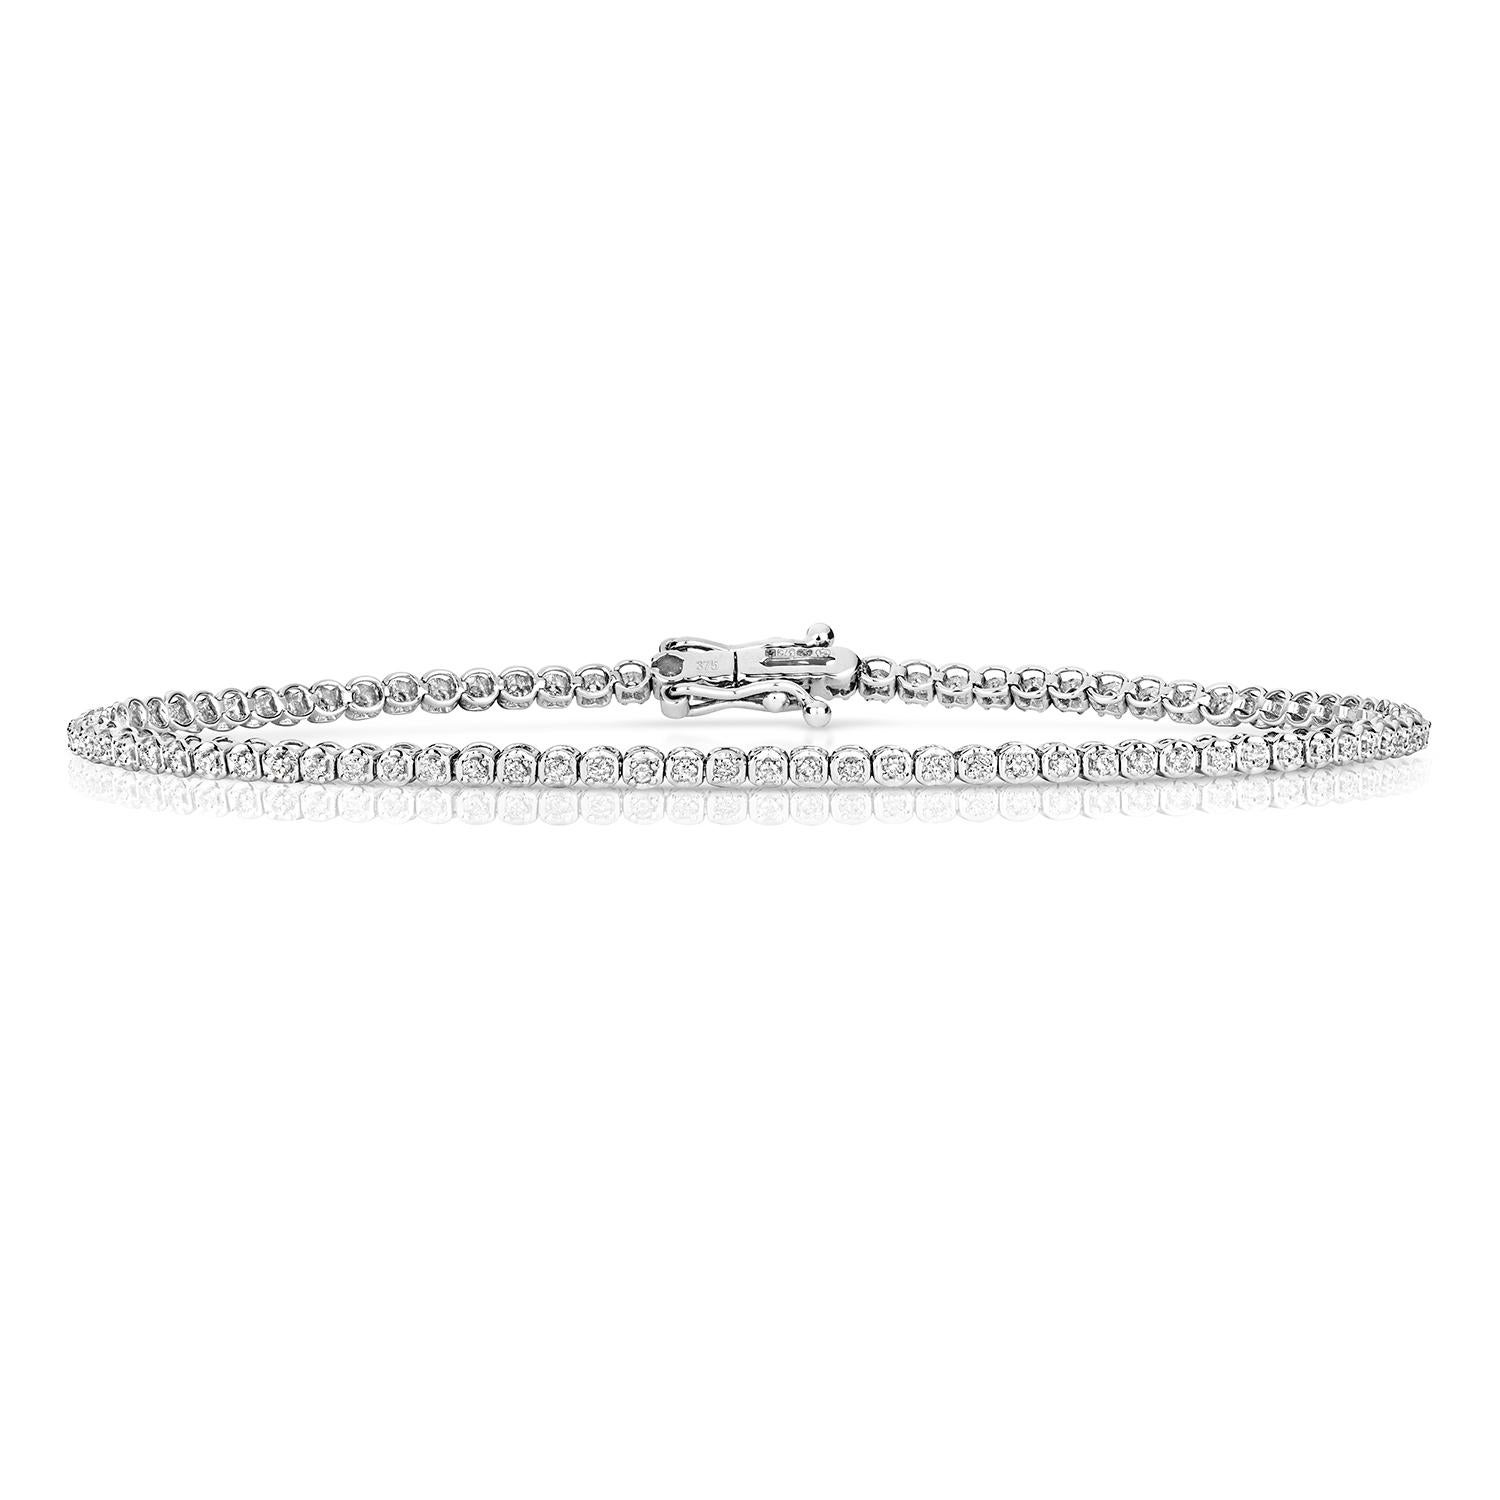 DIAMOND BRACELET

9CT W/G HI I1 0.33CT

Weight: 3.5g

Number Of Stones:85

Total Carates:0.330